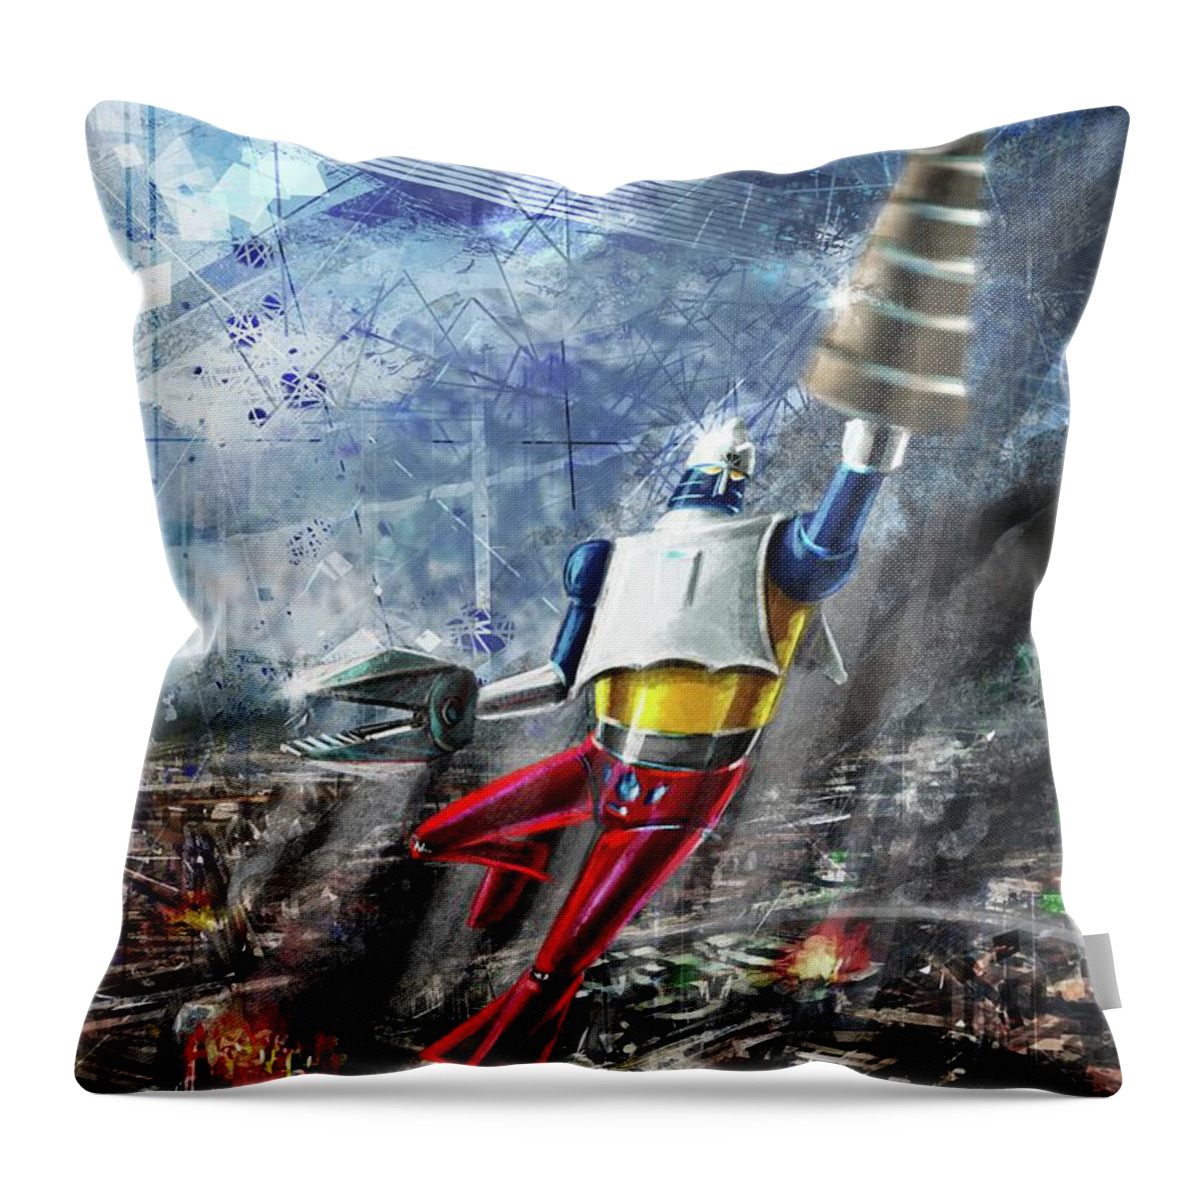 Sci-fi Throw Pillow featuring the digital art Getter2 by Andrea Gatti